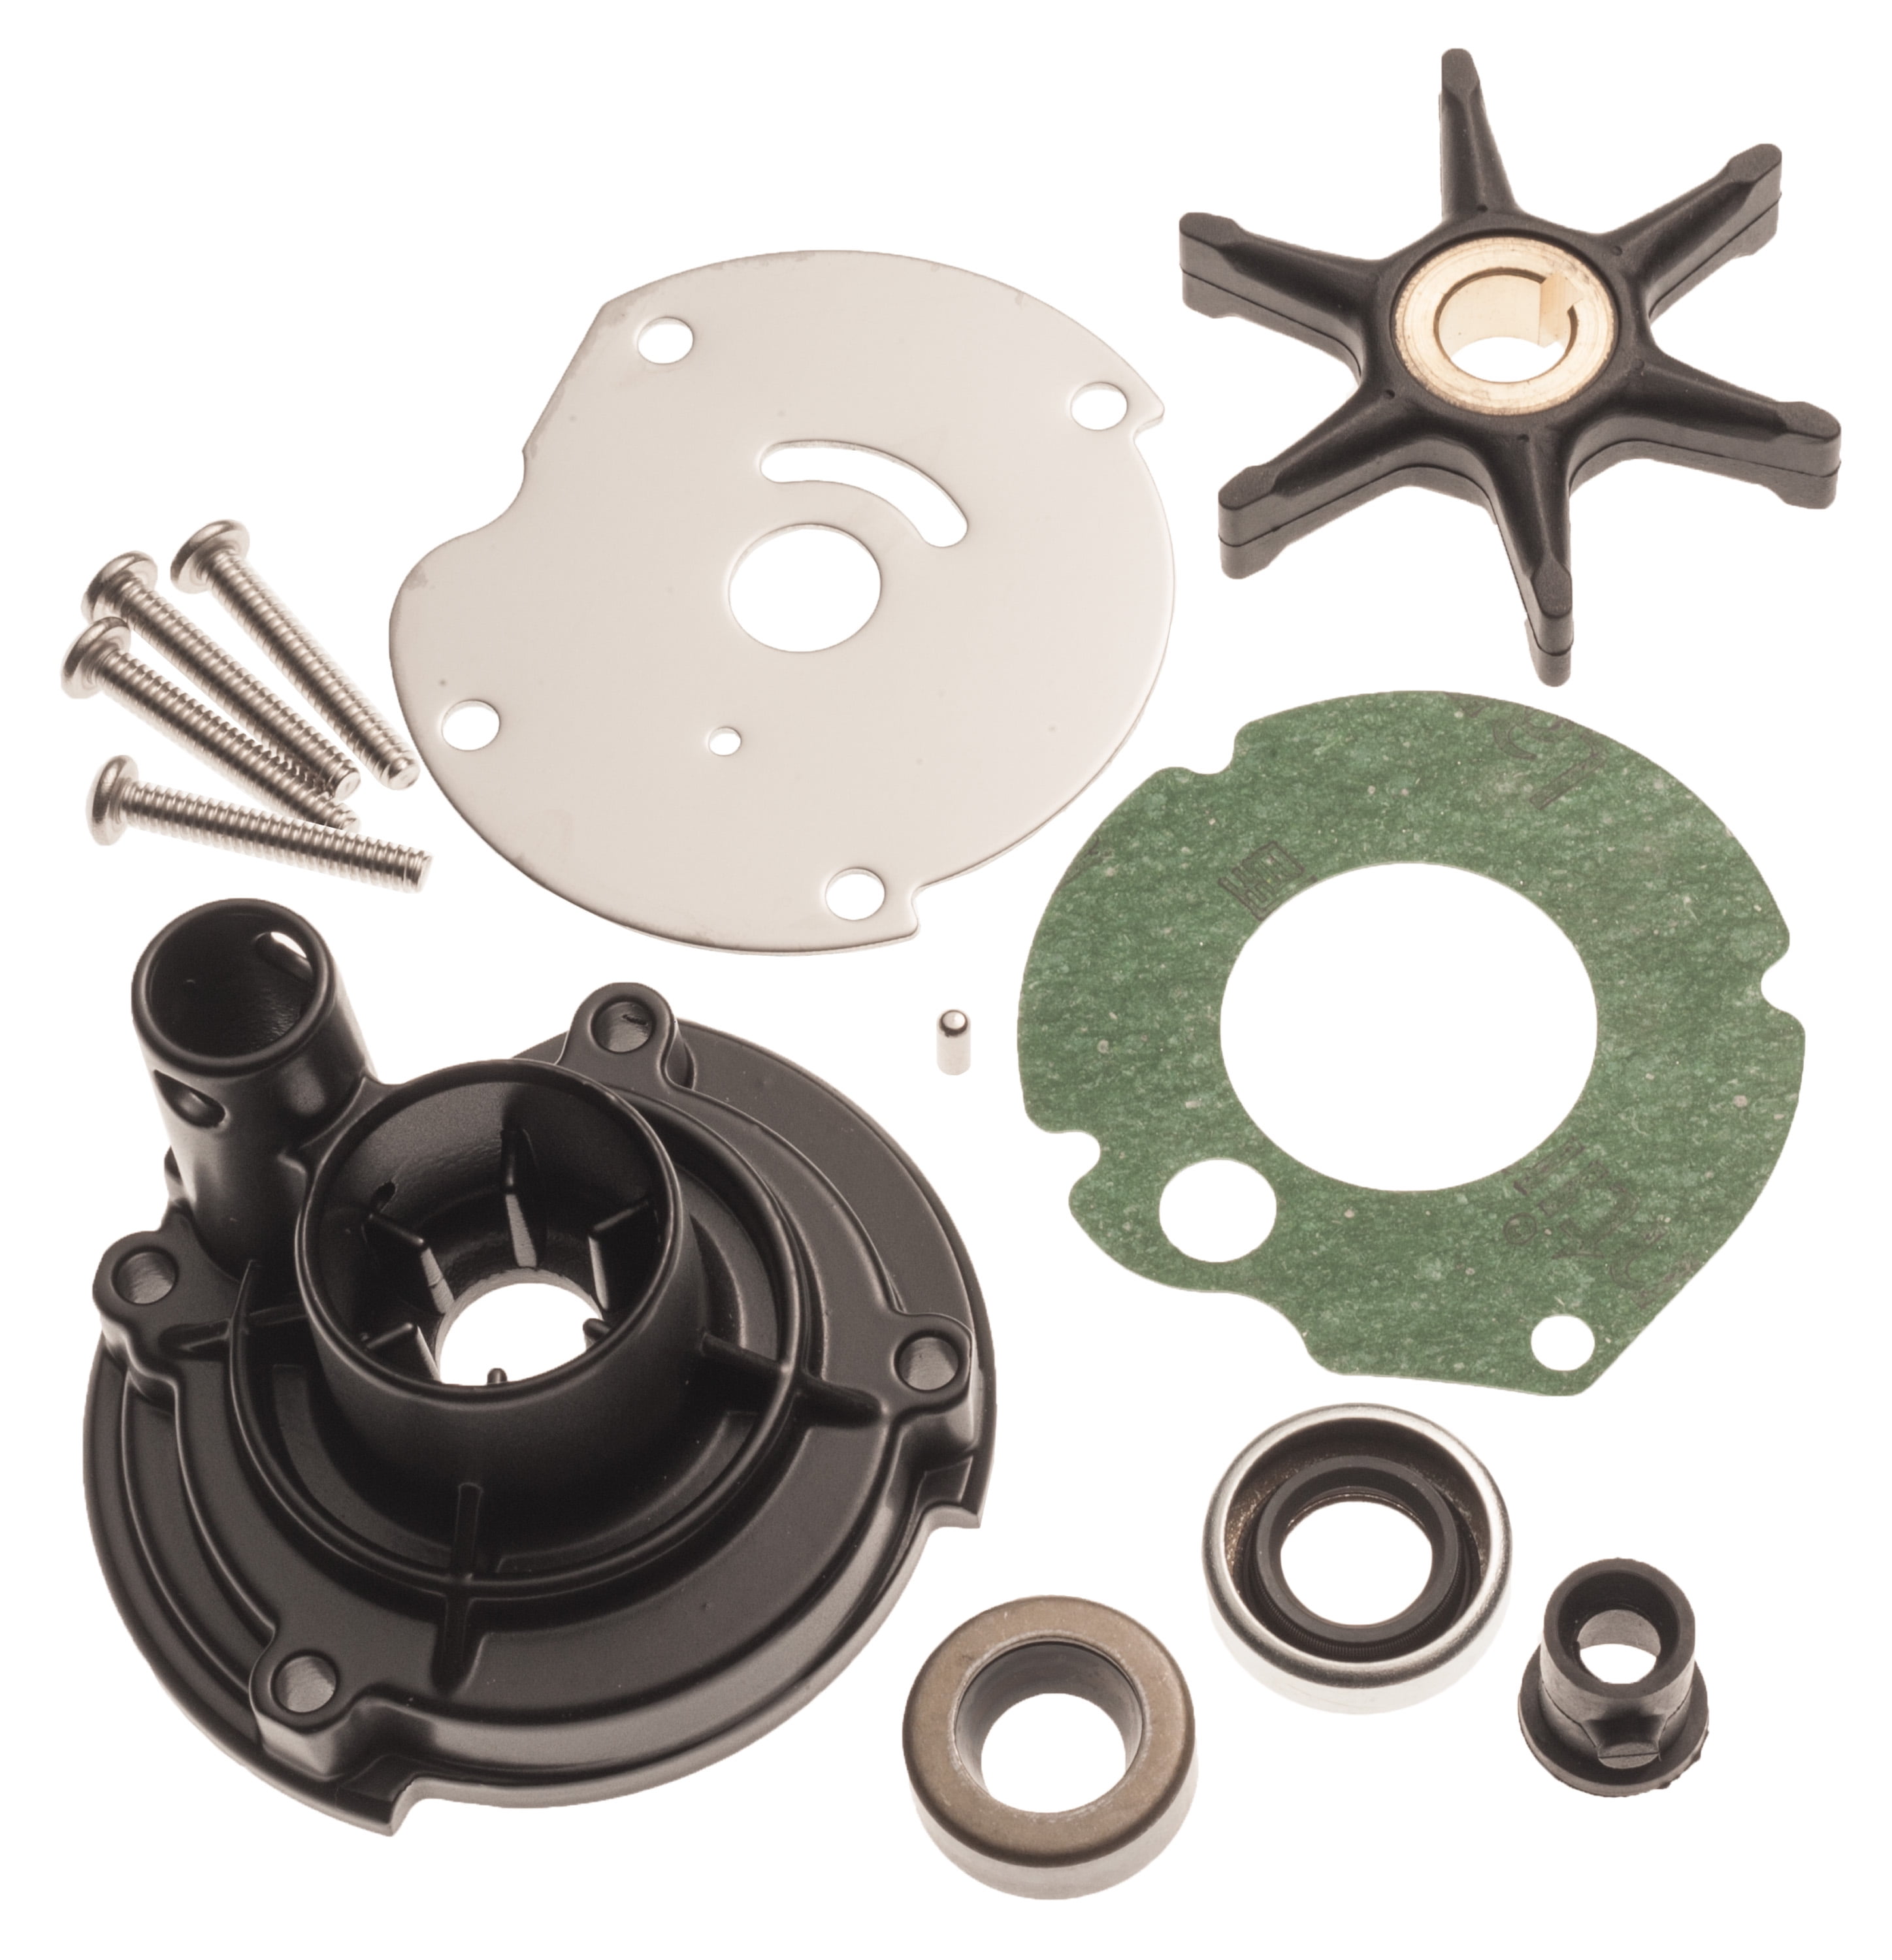 SEI MARINE PRODUCTS Compatible with Evinrude Johnson Impeller Kit 4 5 6 7 8 HP 2 Stroke 1980-2005 4 Stroke 1996-2004 